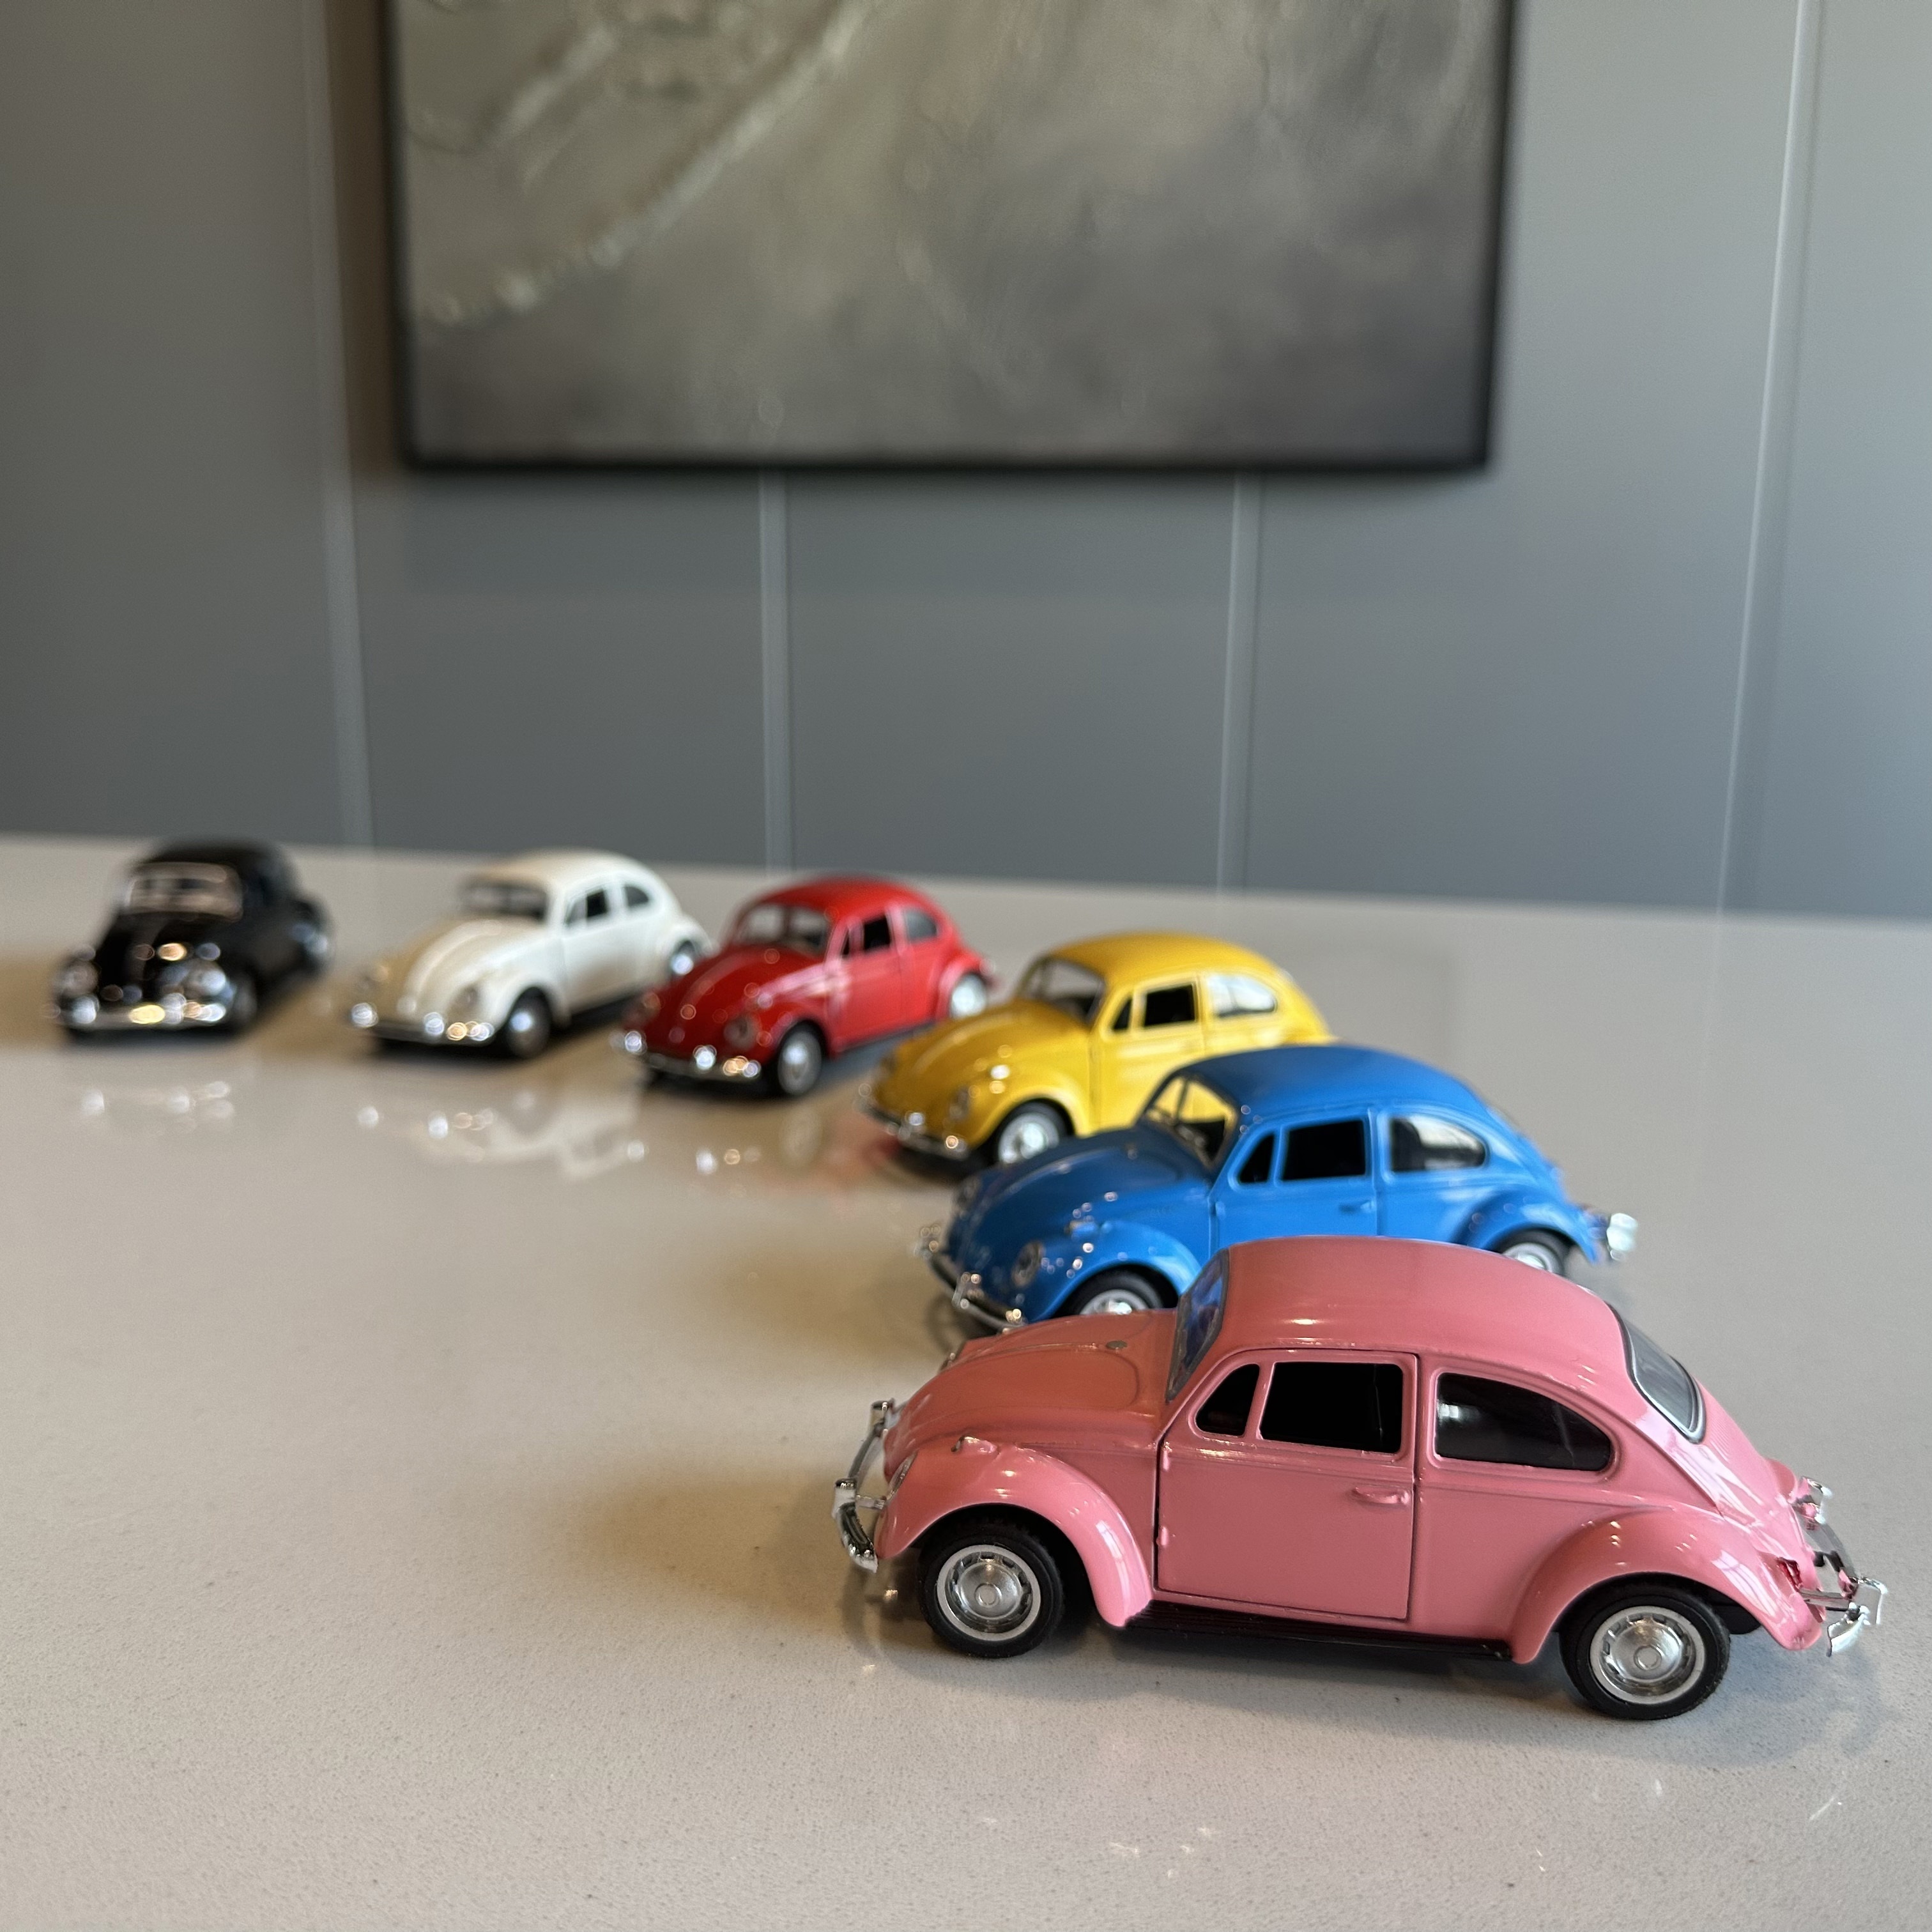 

1:32 Volkswagen Beetle Alloy Car Model Diecast Toy Vehicles Toy Cars Kid Toys High Simulation Toy Model Collection Decoration